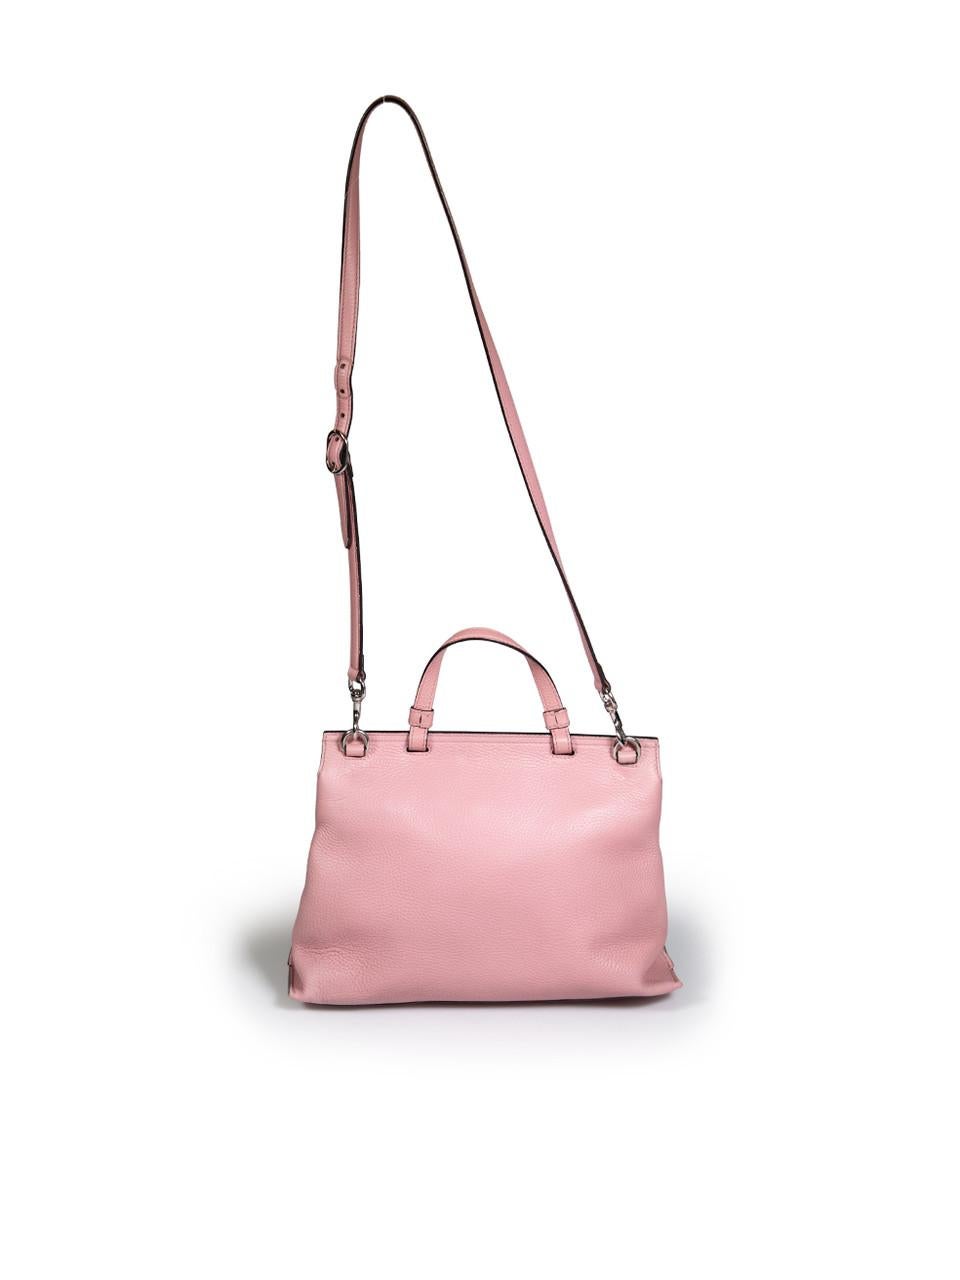 Gucci Pink Leather Medium Bamboo Daily Top Handle Bag In Excellent Condition For Sale In London, GB